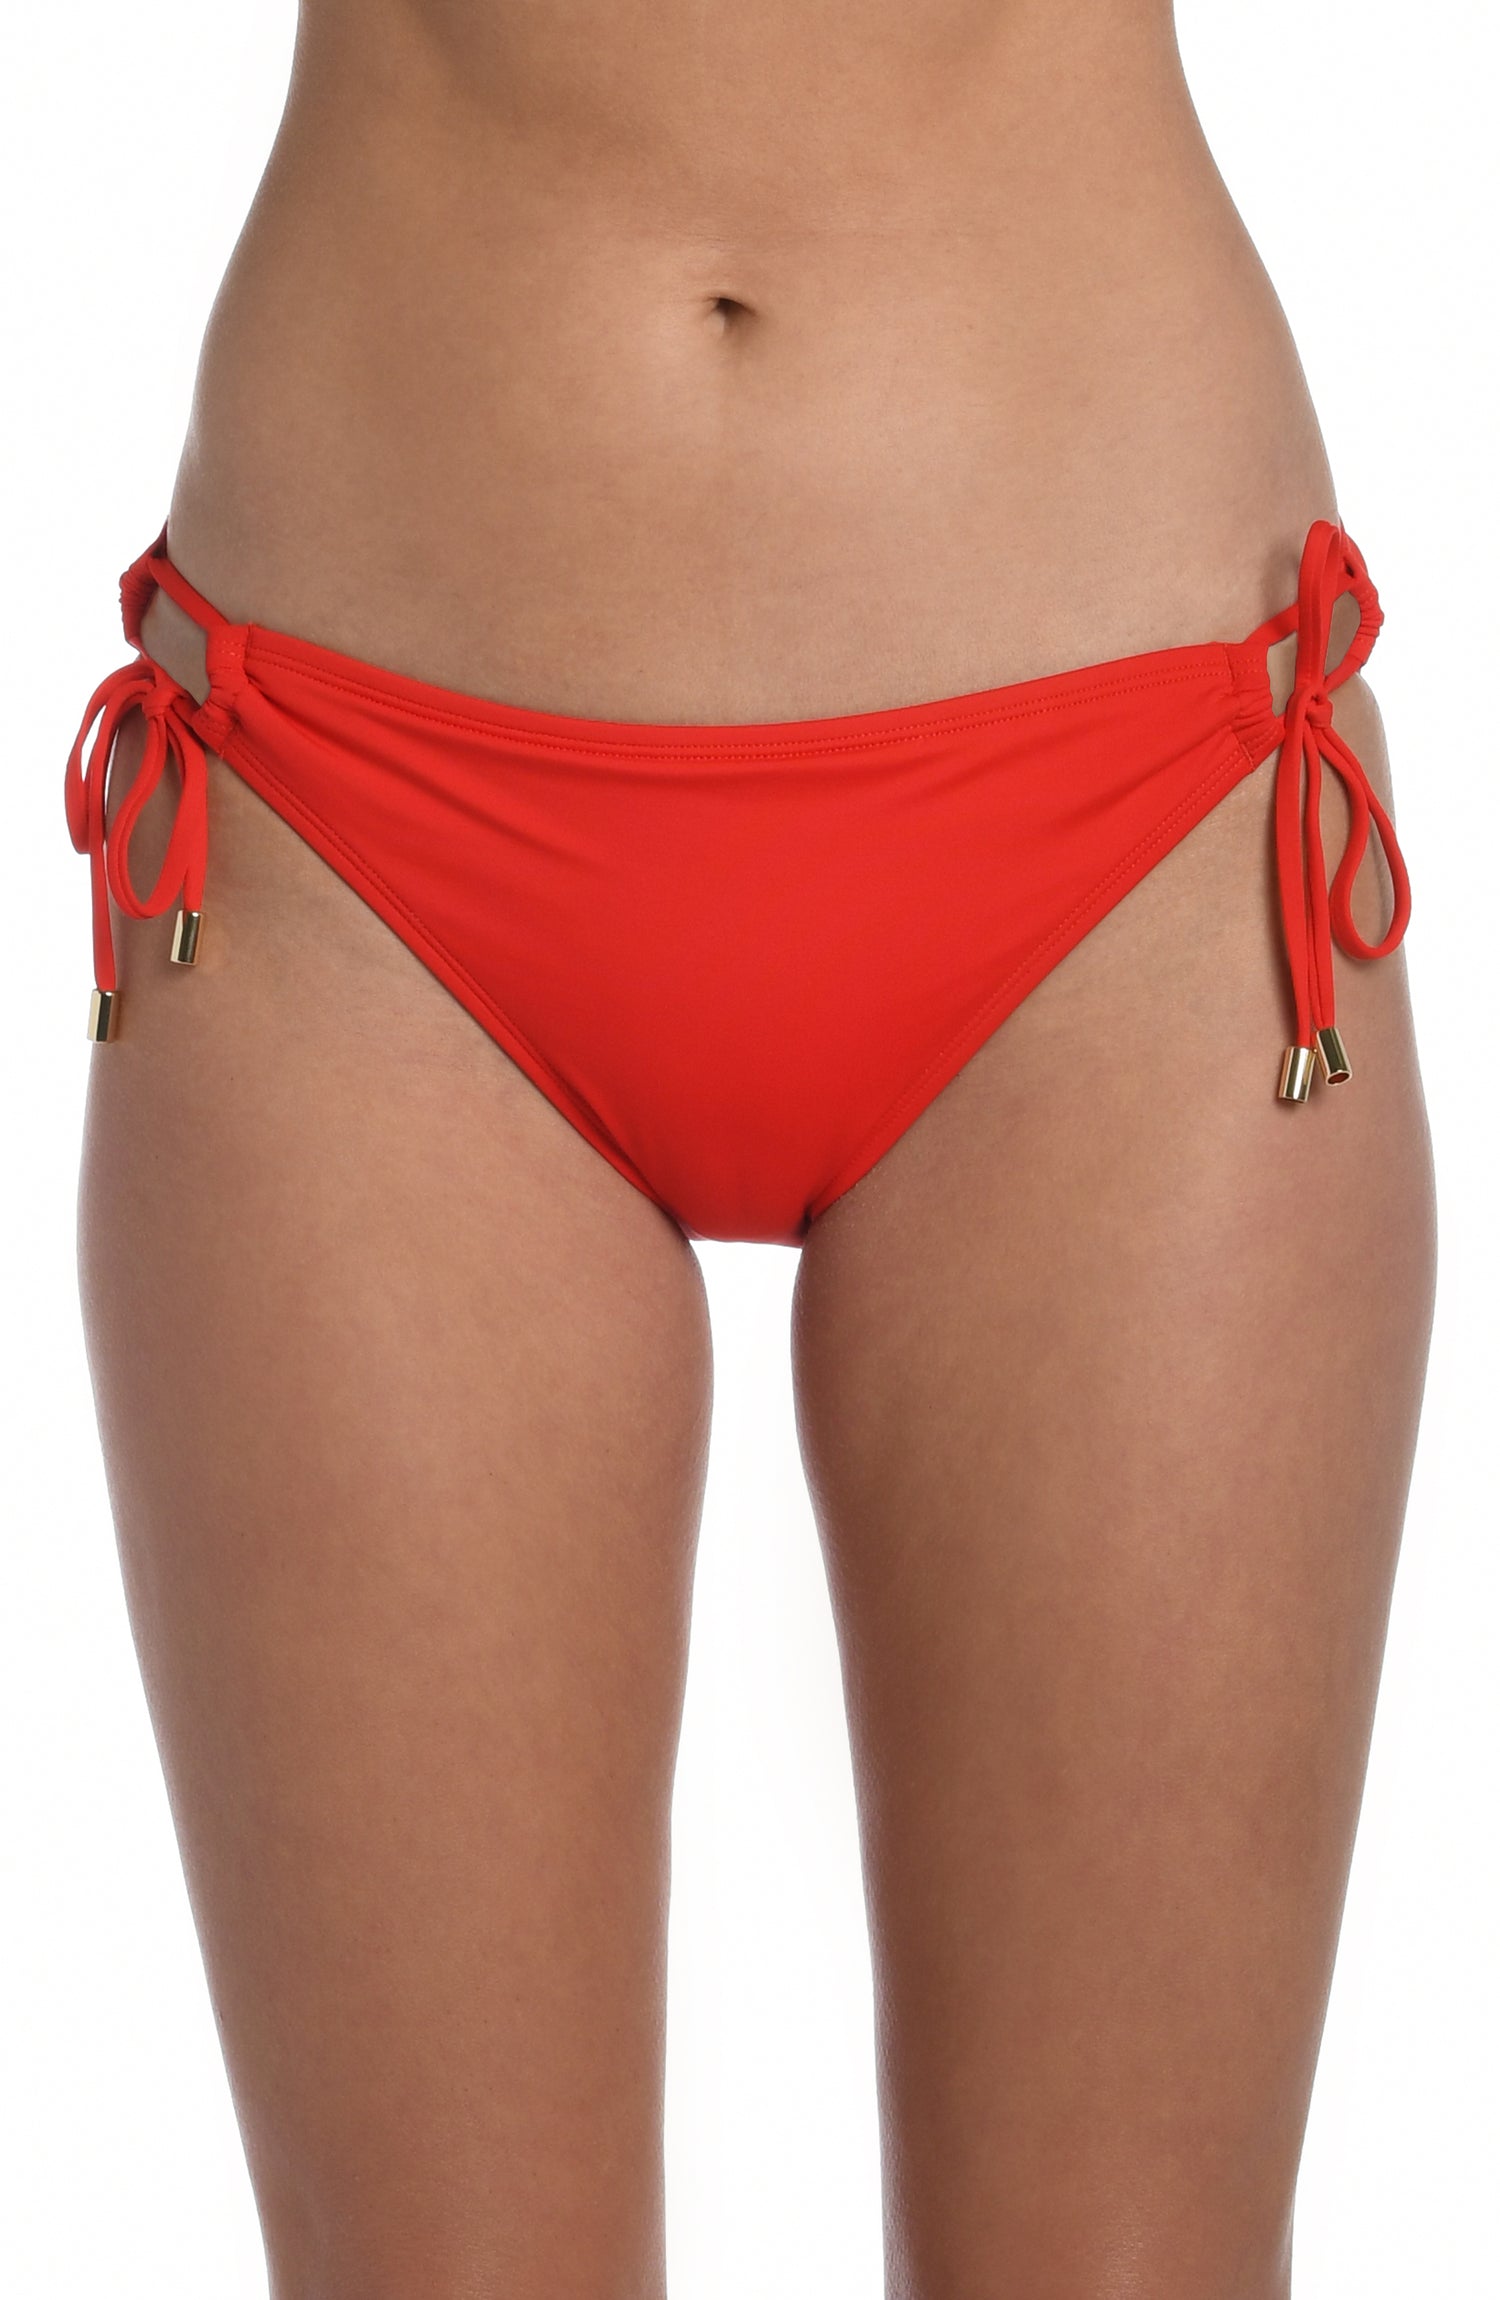 Model is wearing a cherry colored side-tie hipster swimsuit bottom from our Best-Selling Island Goddess collection.